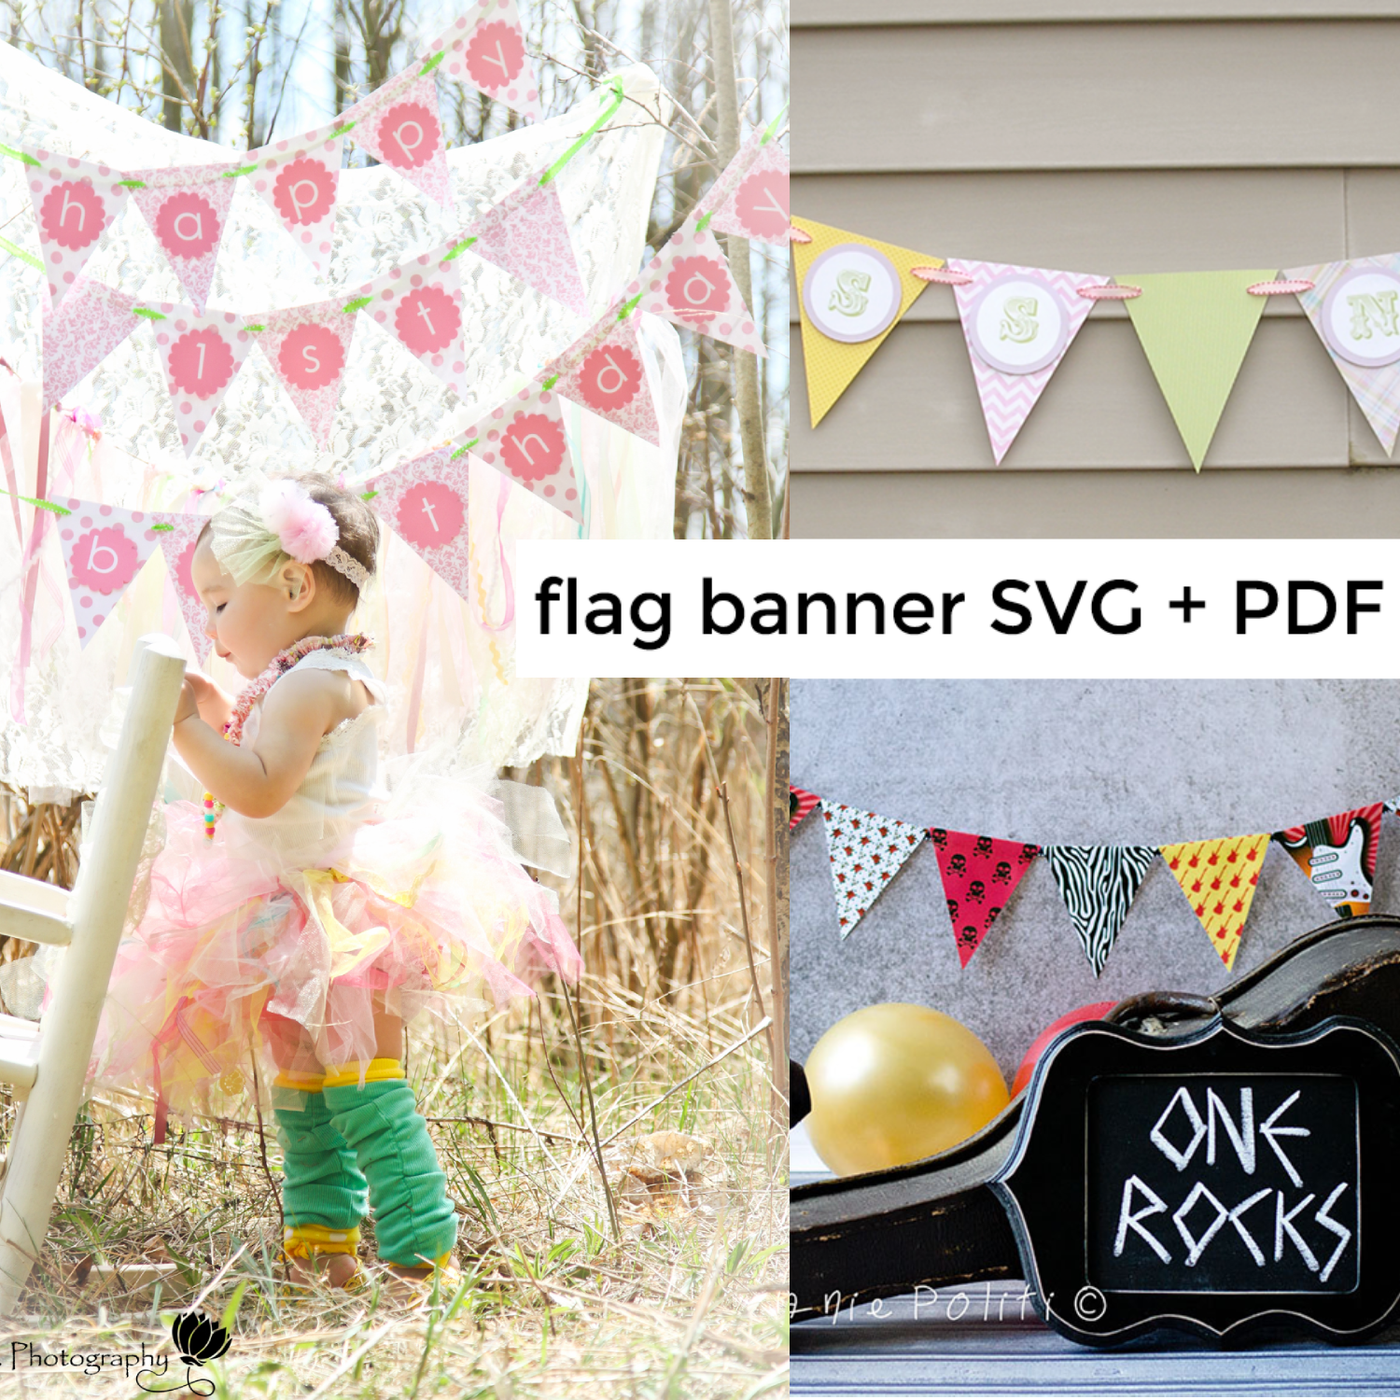 Collage of 3 flag banner SVG + PDF design images. One has an Asian baby in a tutu under a banner that says "Happy 1st birthday."